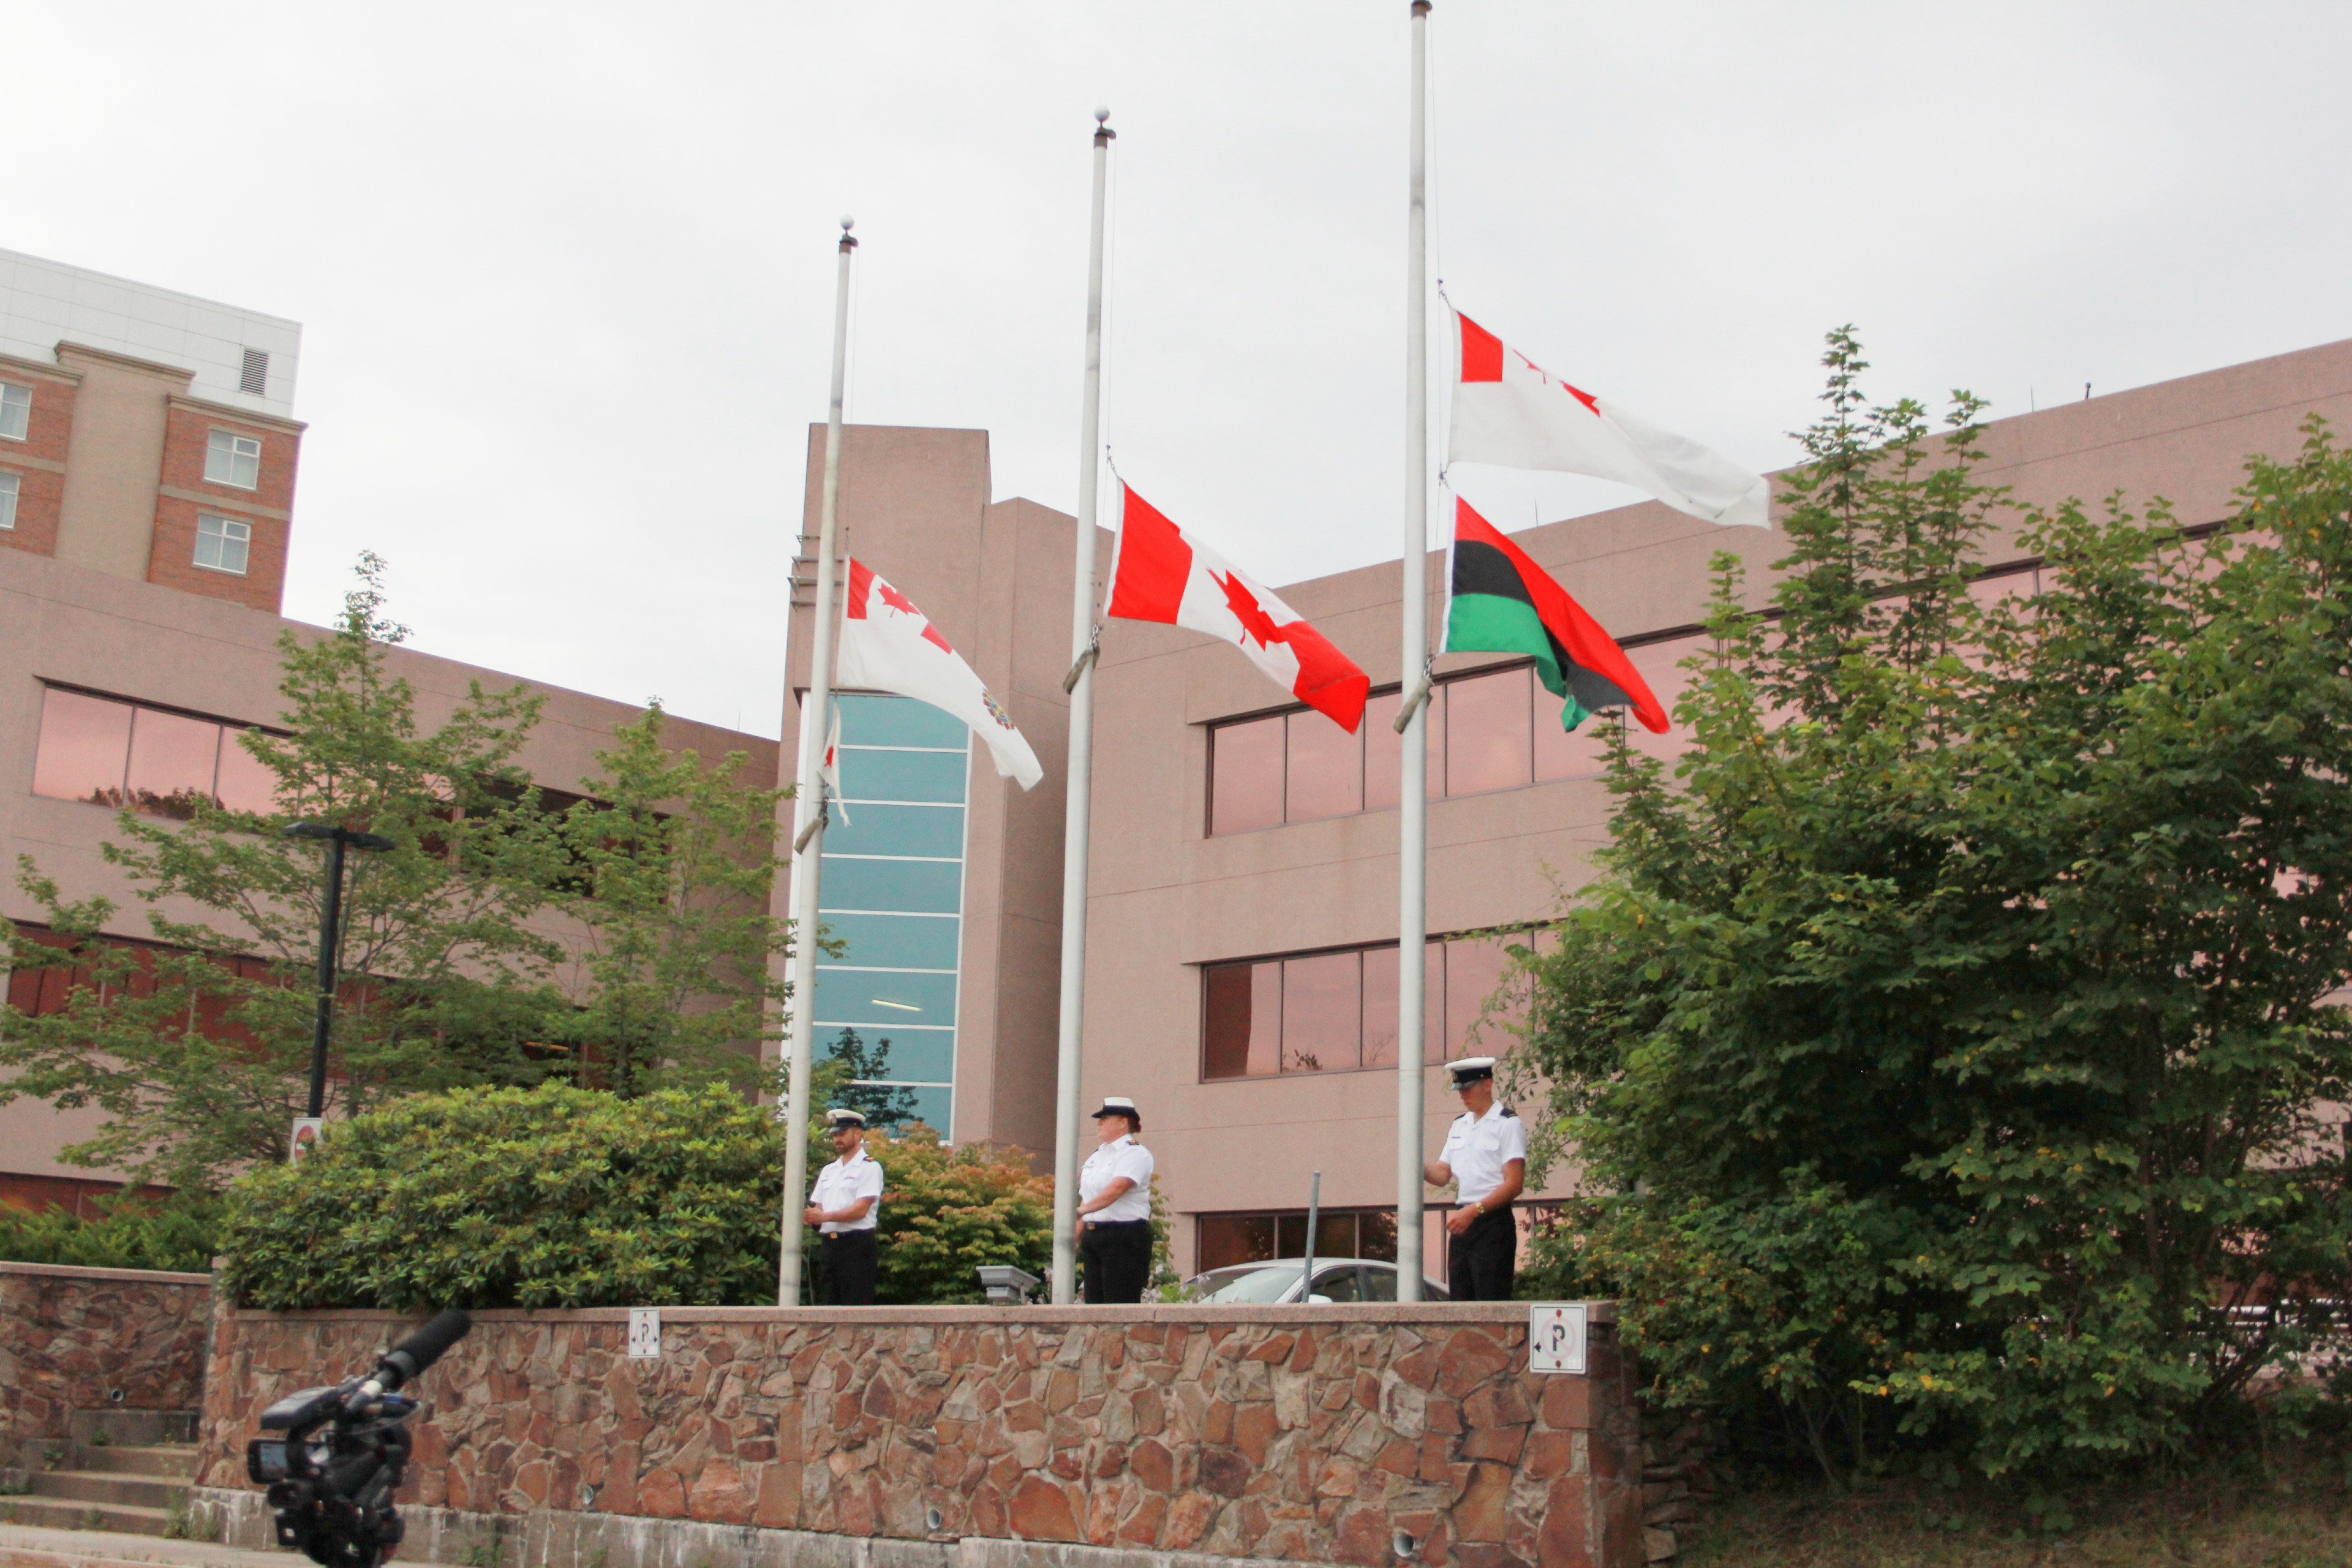 The Pan-African flag was raised at CFB Halifax on July 30 to commemorate the newly designated Emancipation Day, August 1.